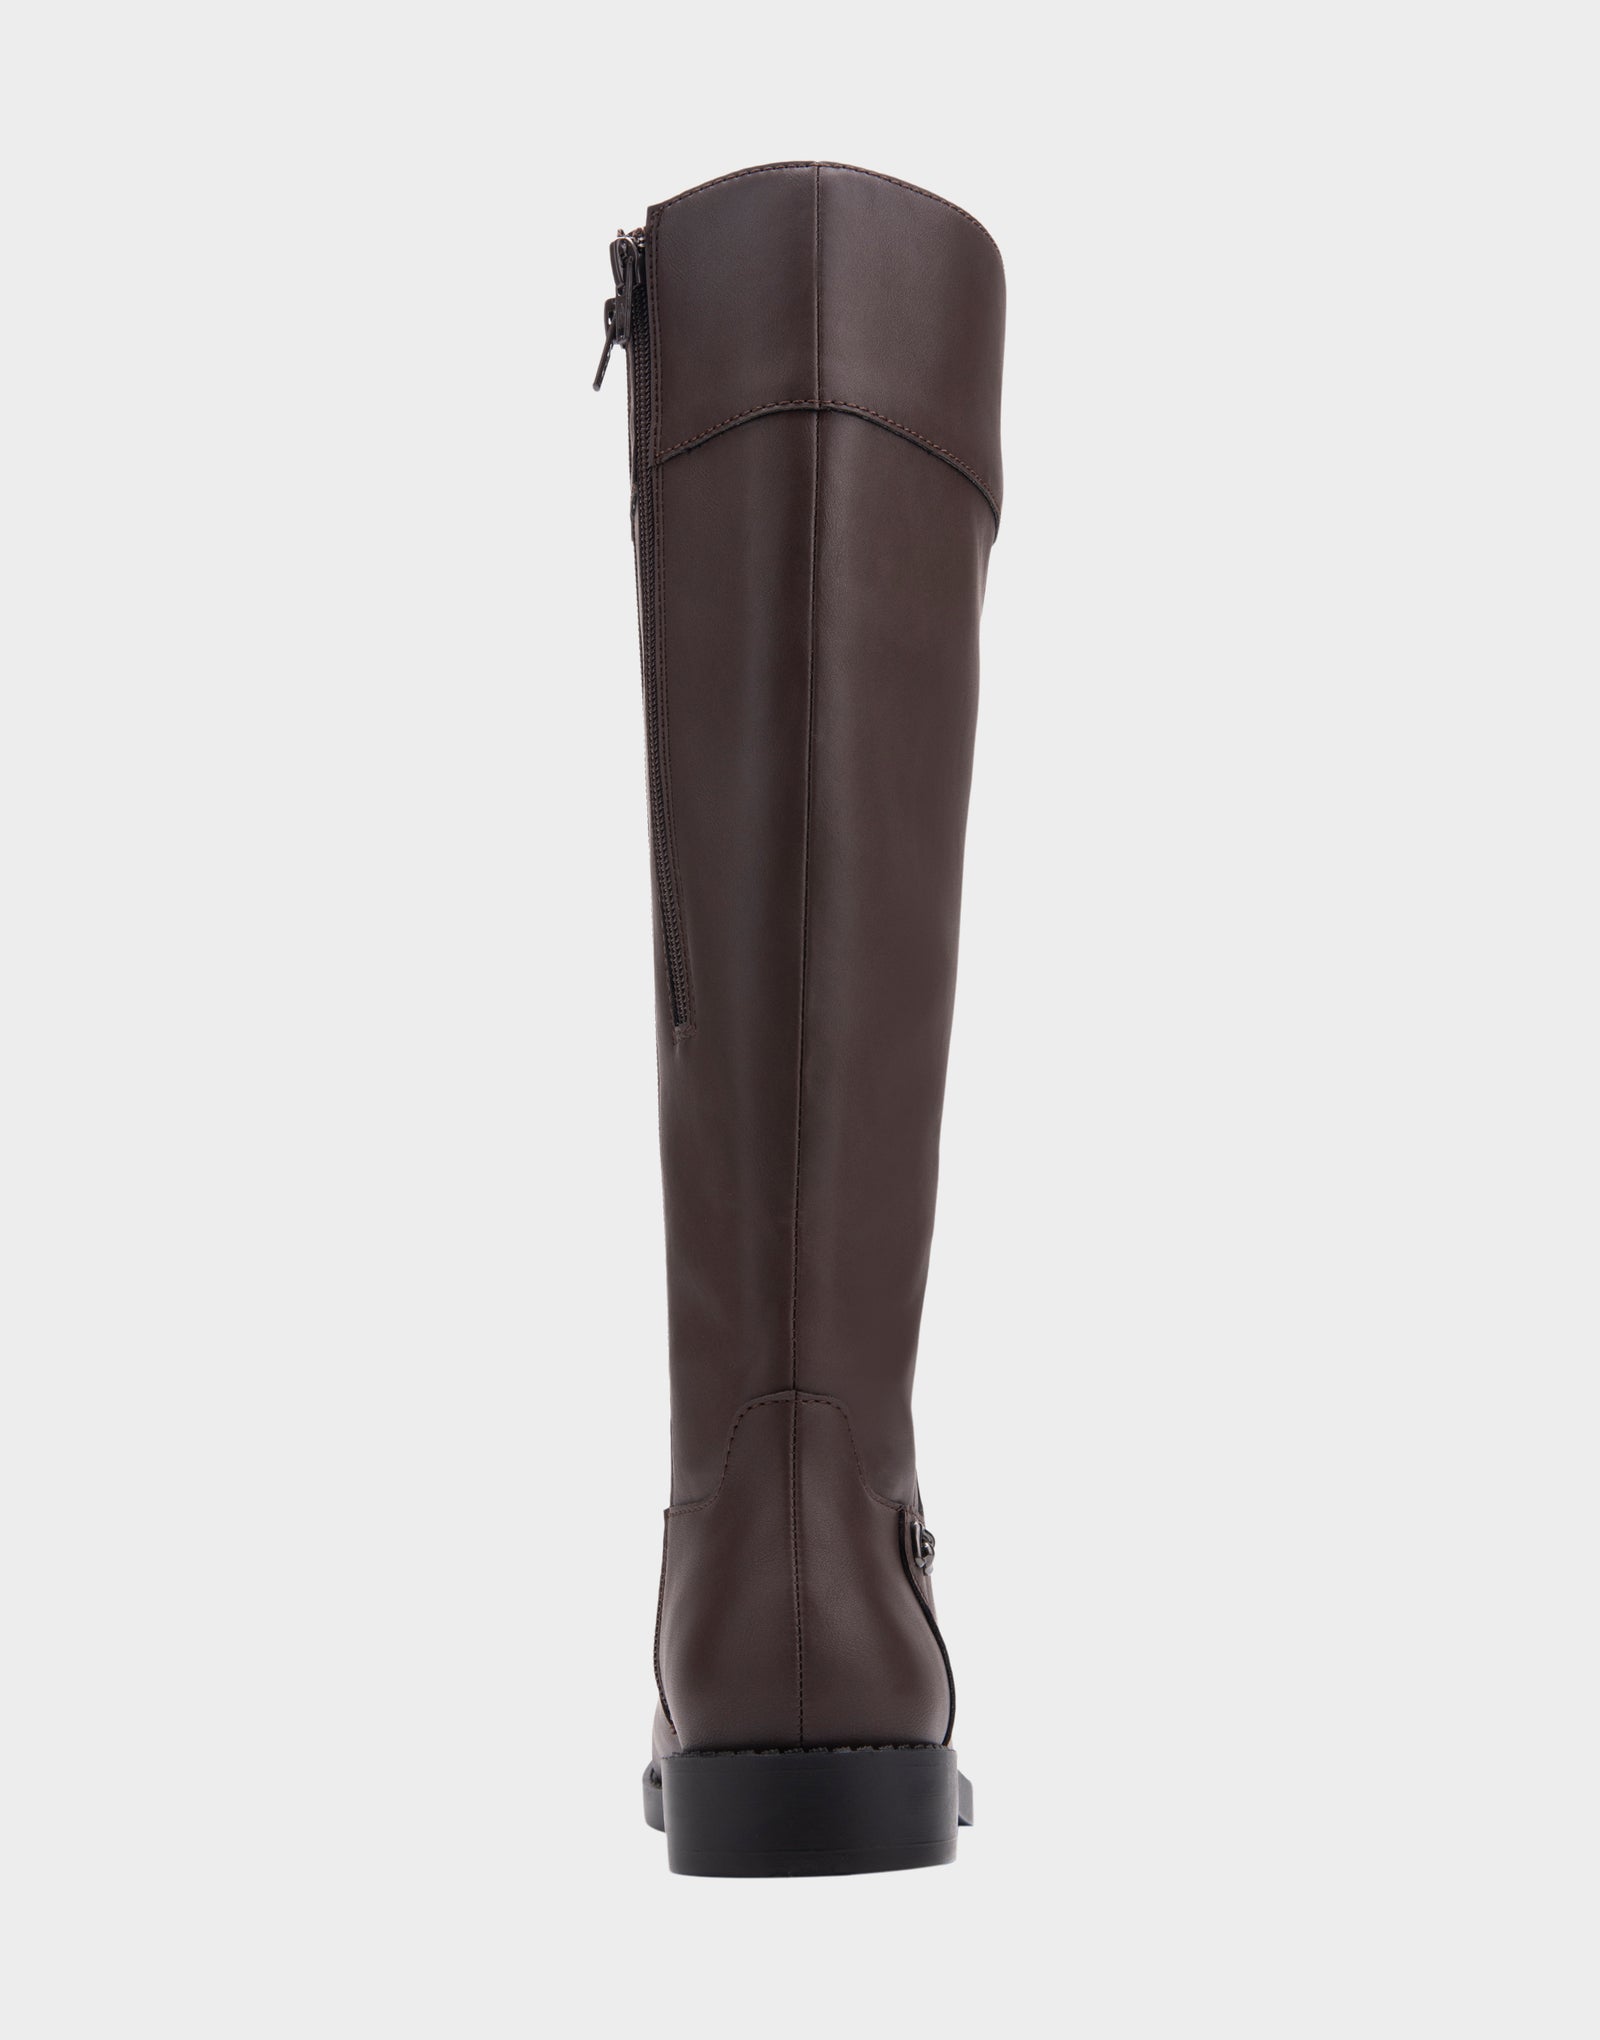 Women's Tall Shaft Boot in Brown